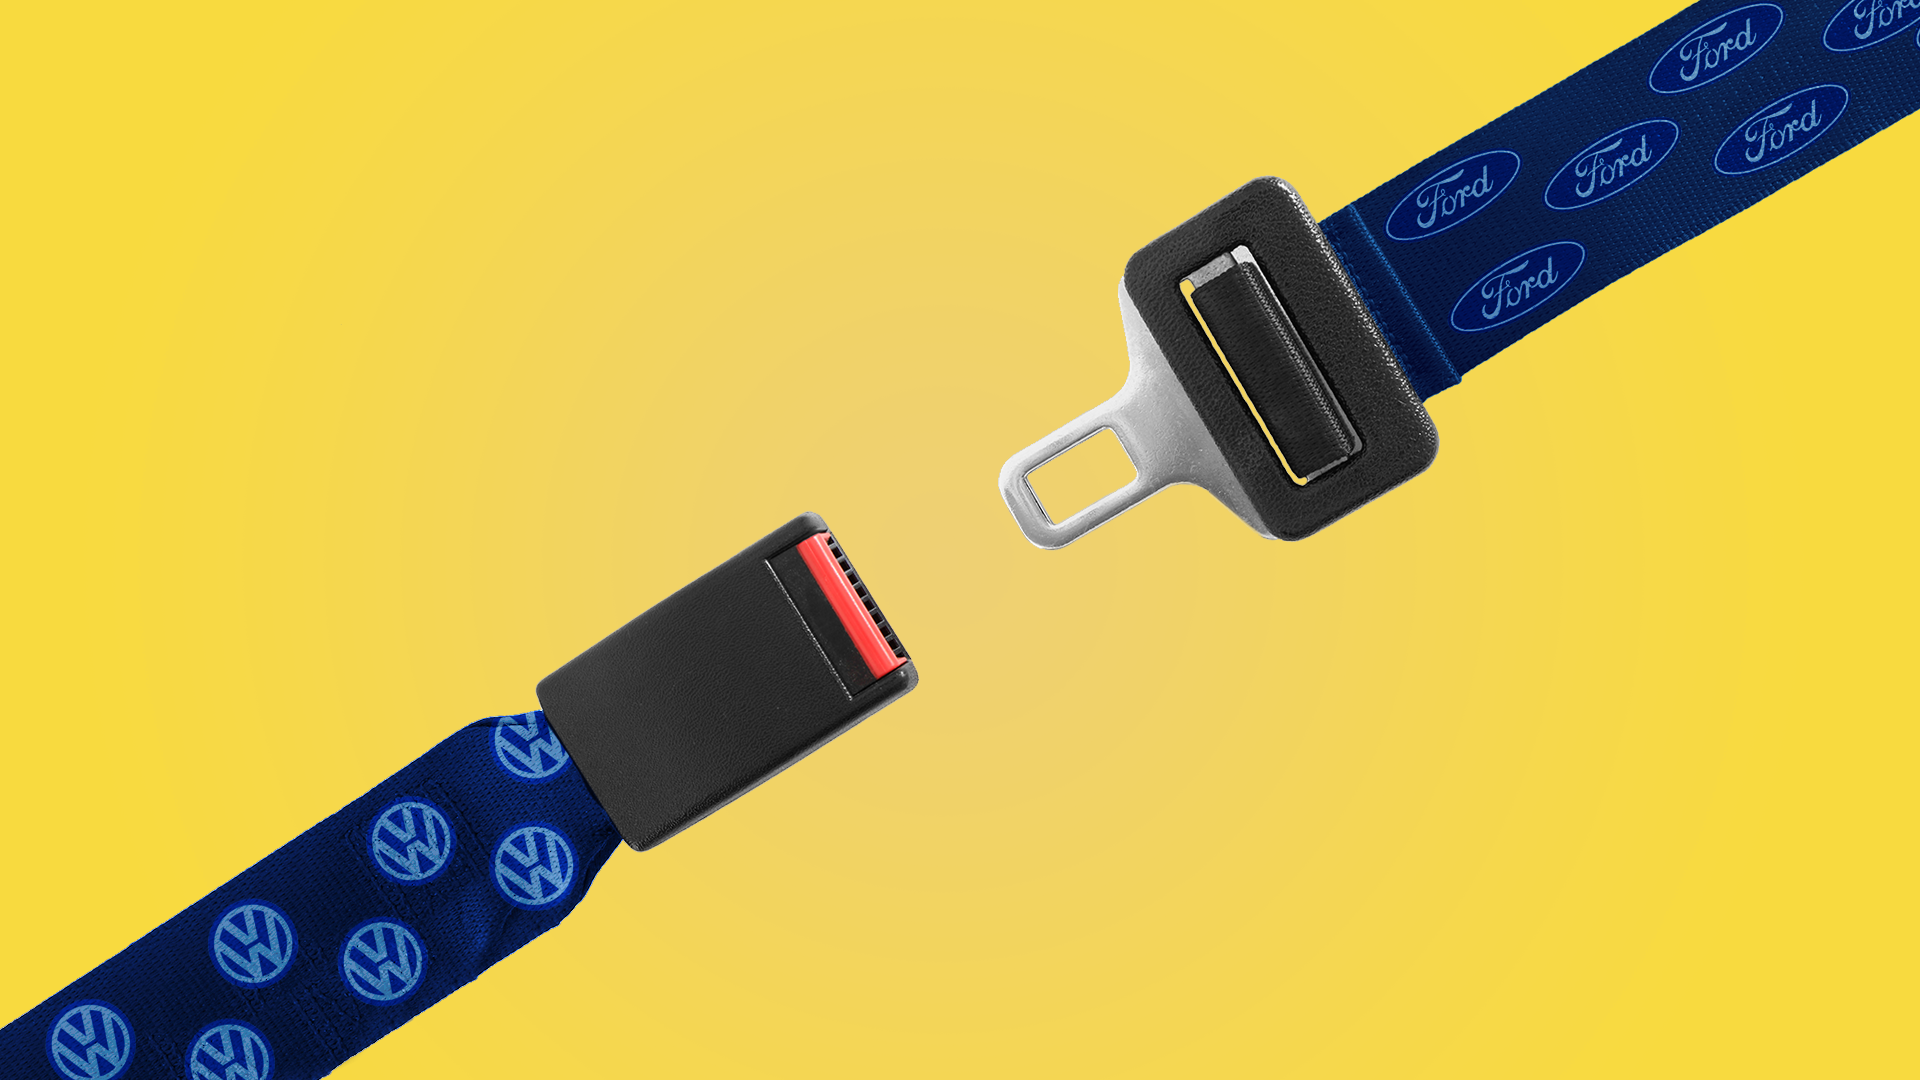 Illustration of a seat belt coming together with one part of the belt covered in a Ford logo pattern and the other in a VW logo pattern.